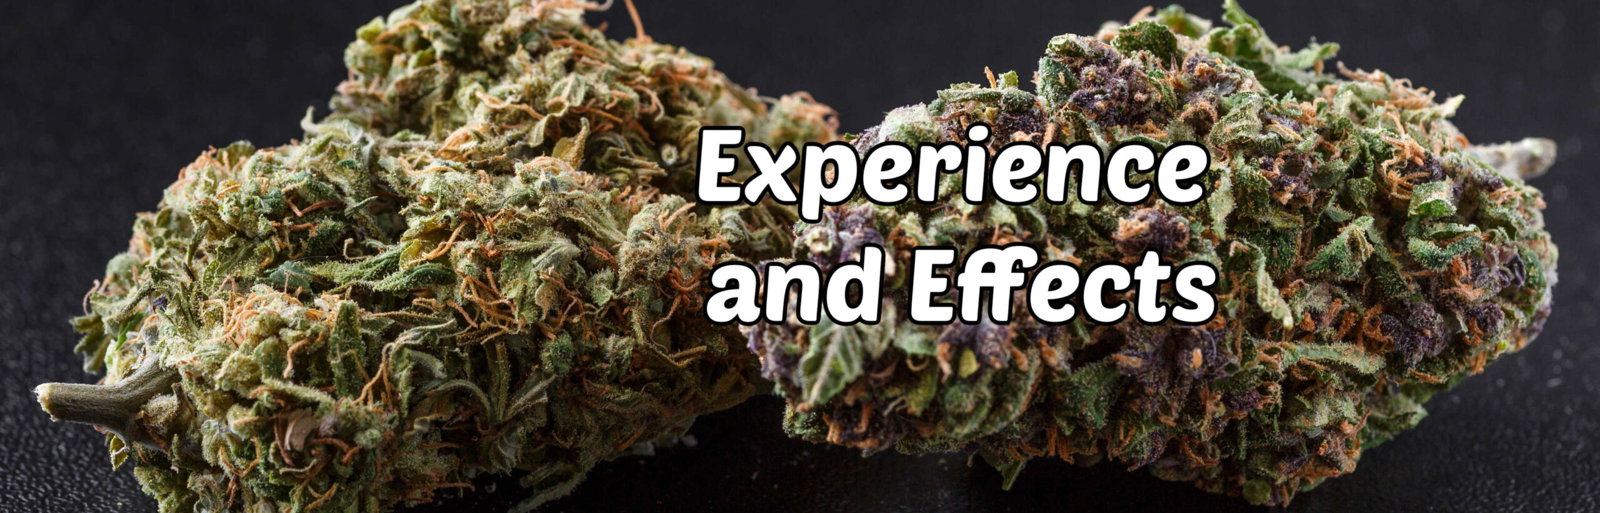 image of lifter strain experience and effects